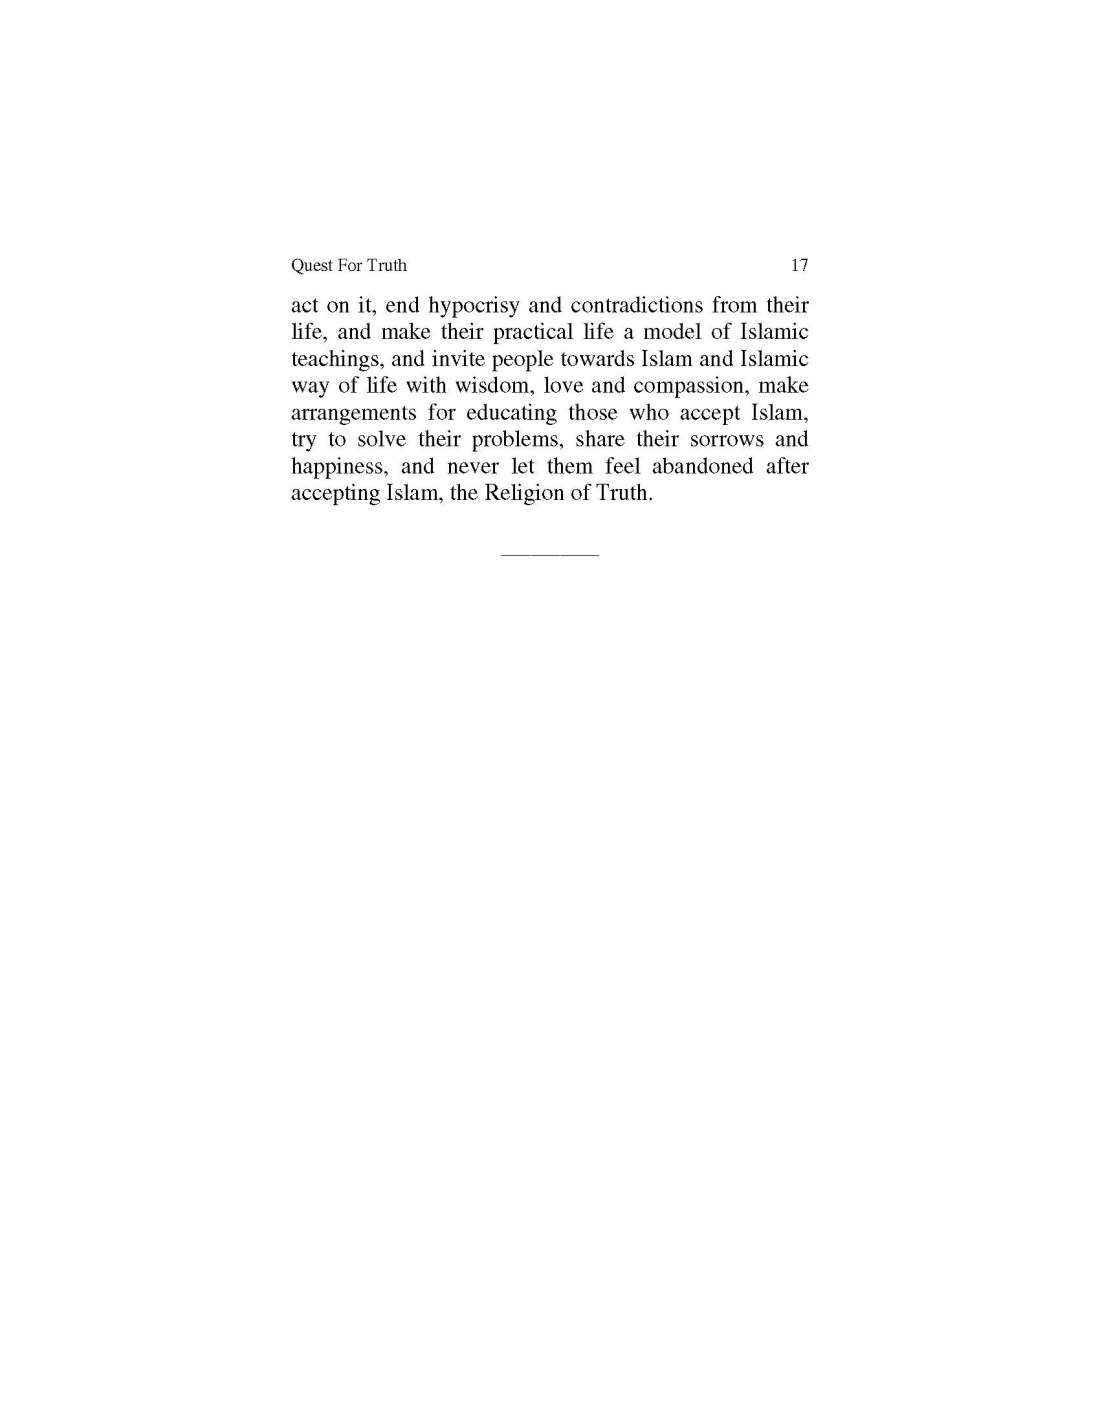 53_book_Page_017